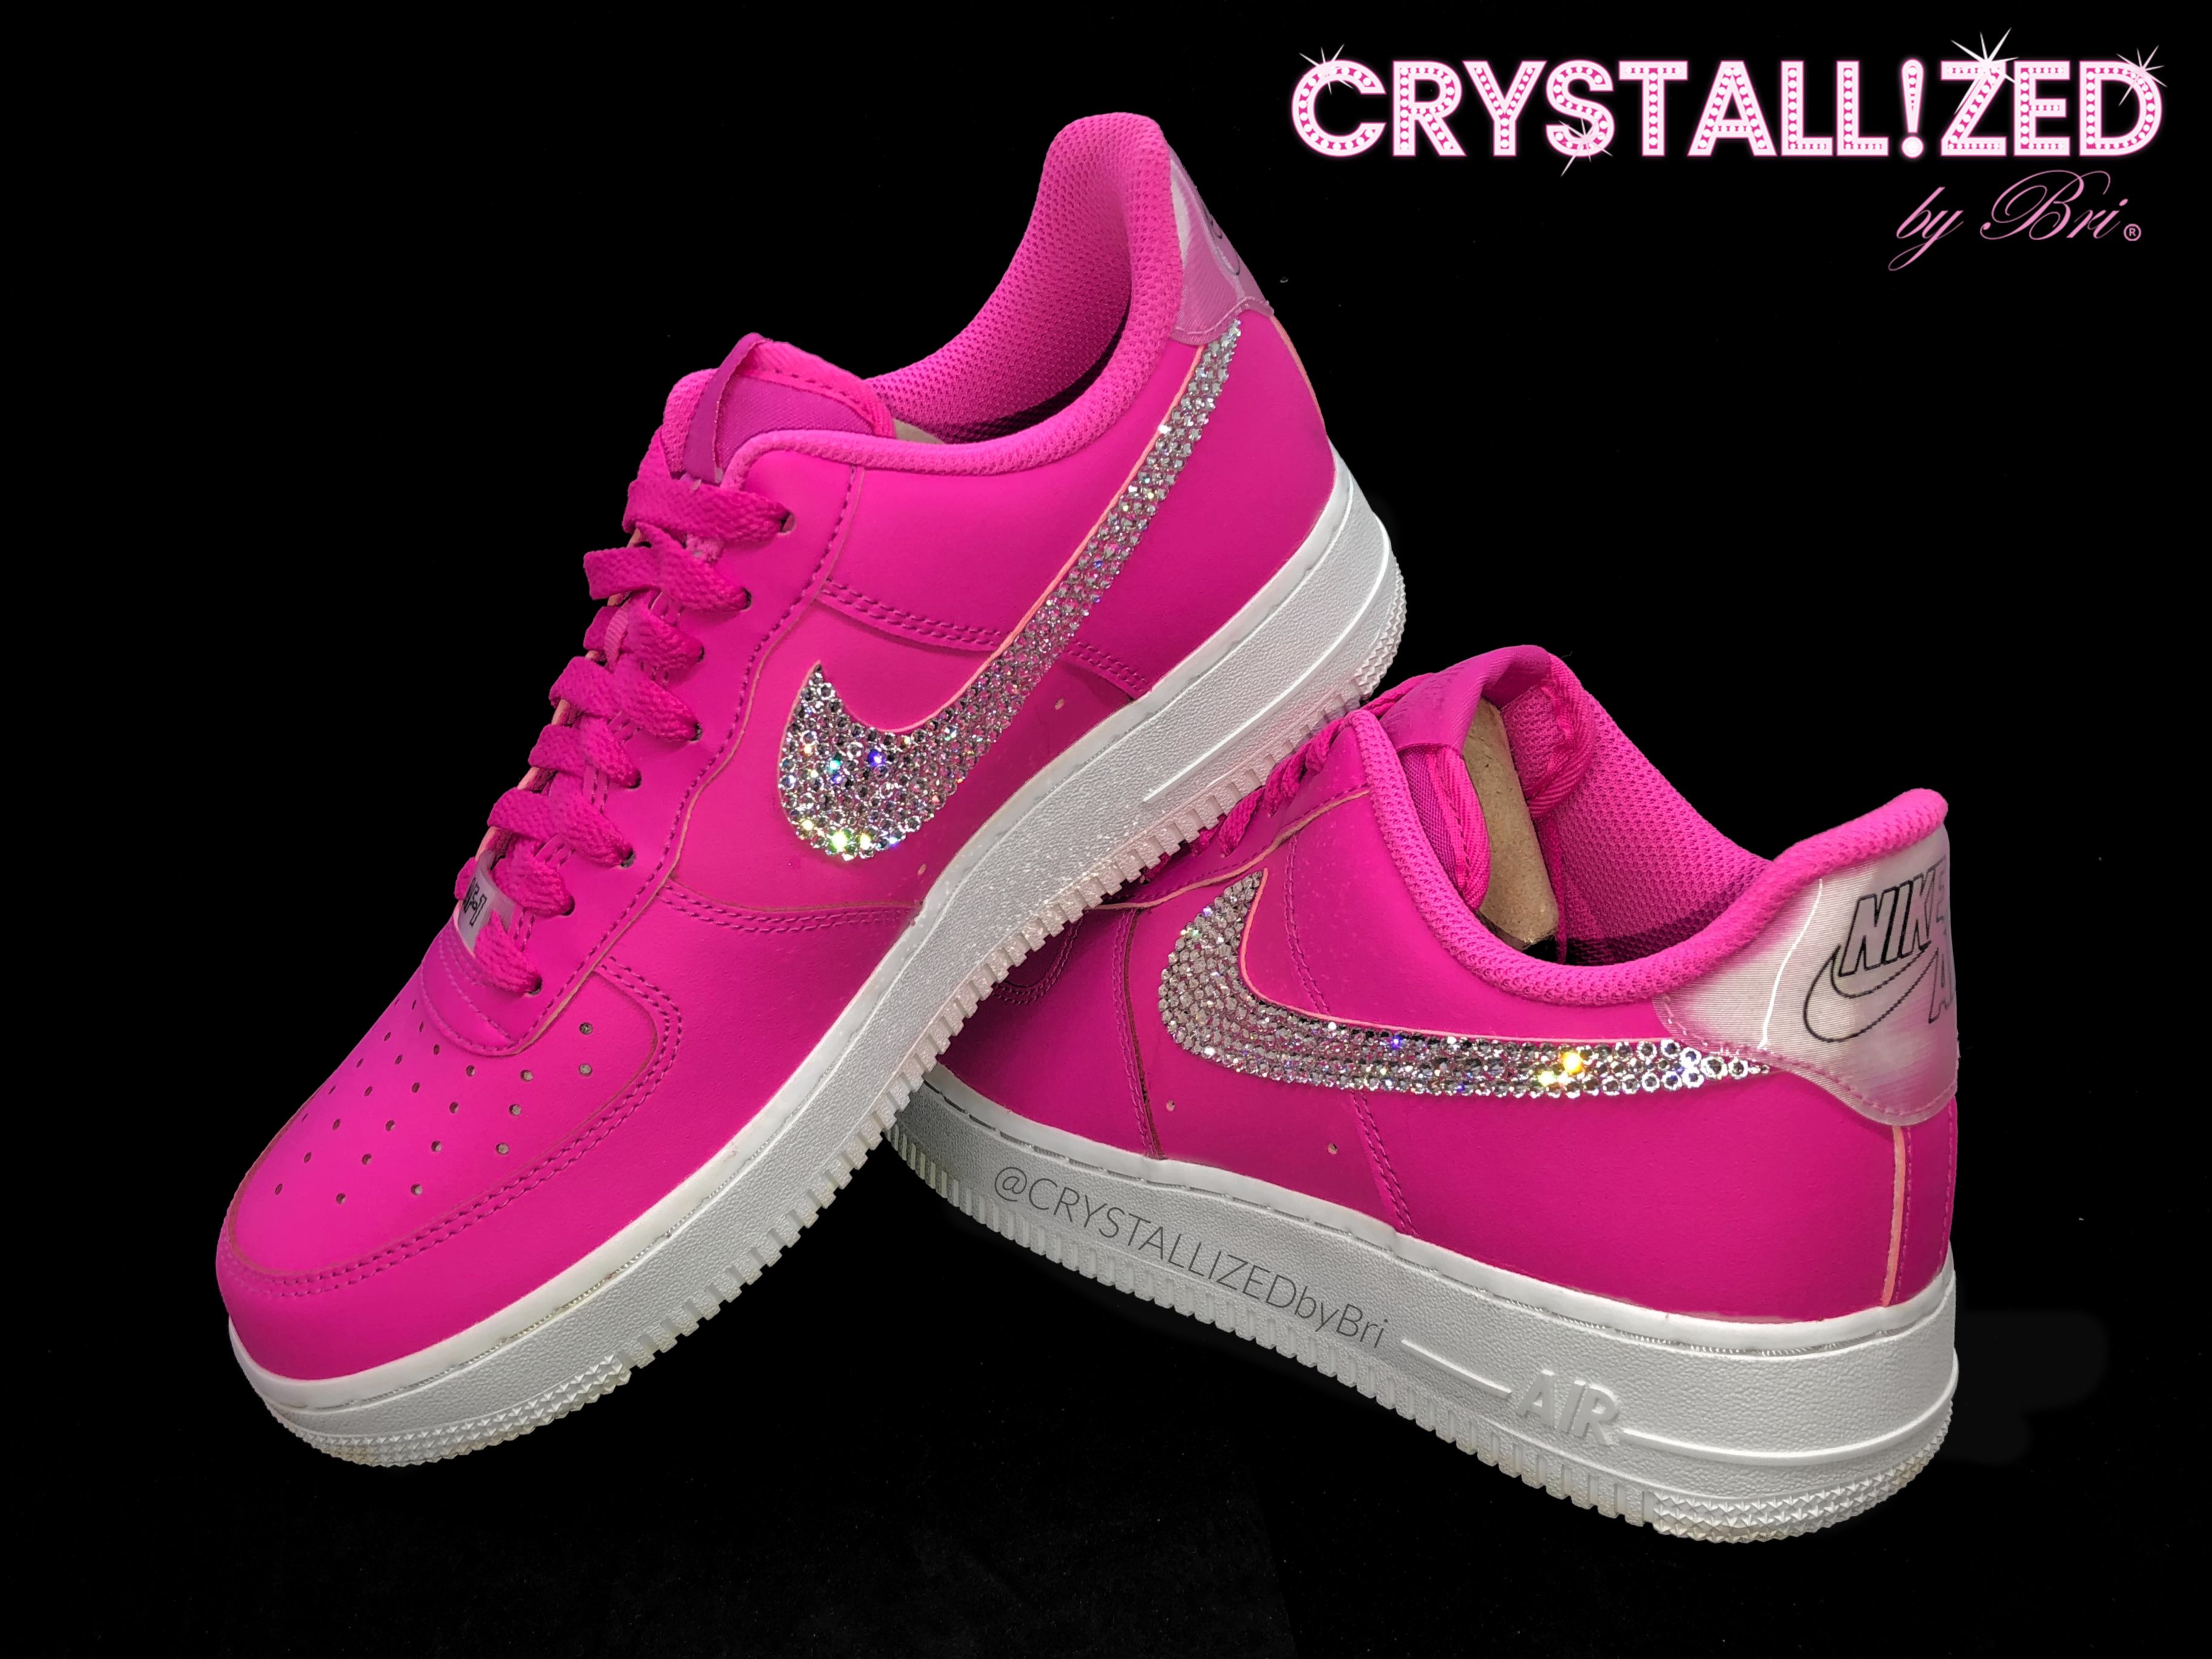 Hand Made Nike Crystallized Air Force 1 Women's Sneakers Bling Genuine European Bedazzled Pink, made to order CRYSTALL!ZED by Bri, LLC | CustomMade.com